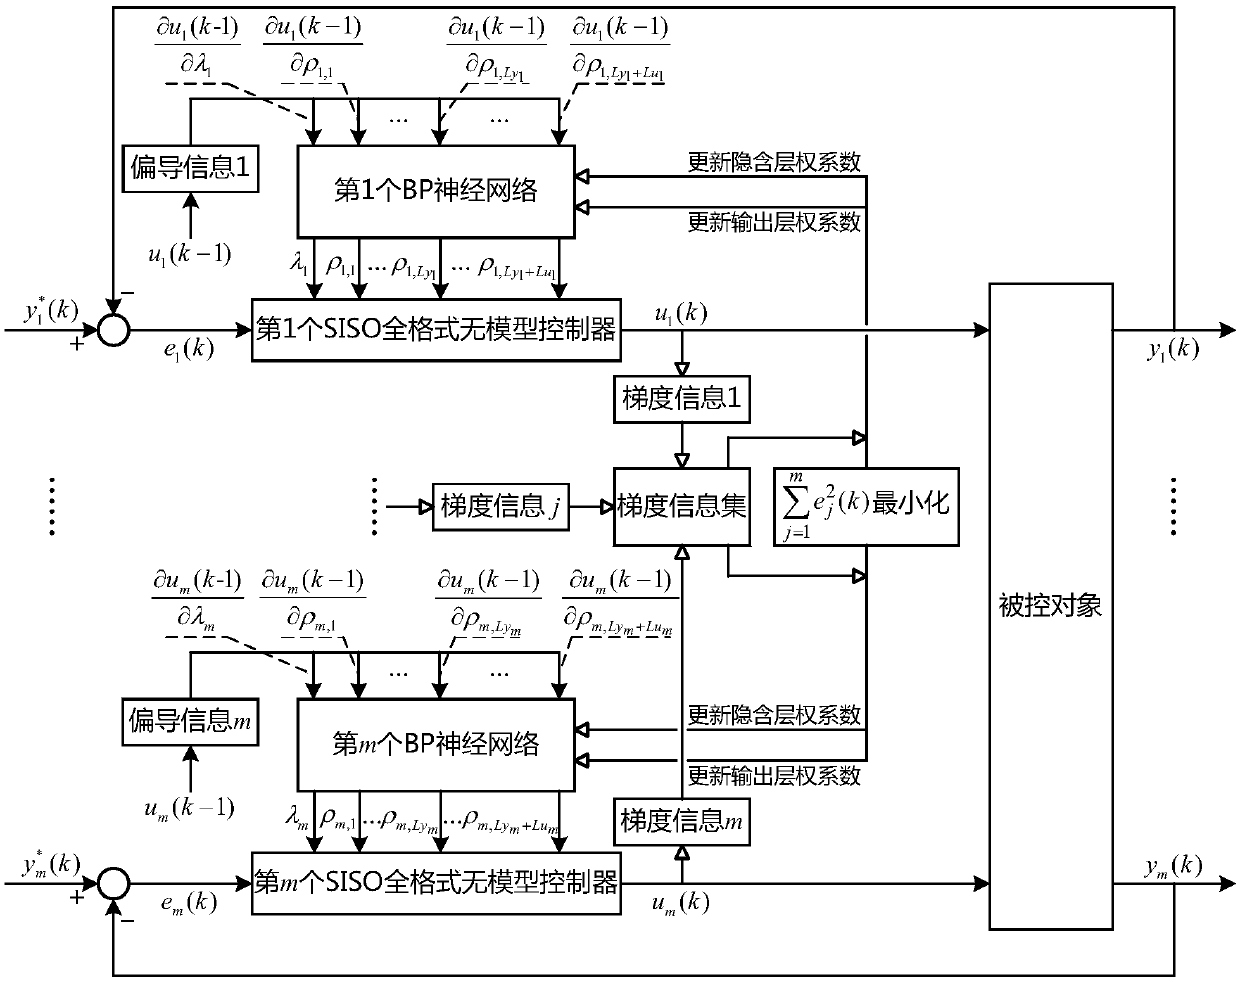 Decoupling control method for MIMO system based on SISO full-format model-free controller and partial derivative information